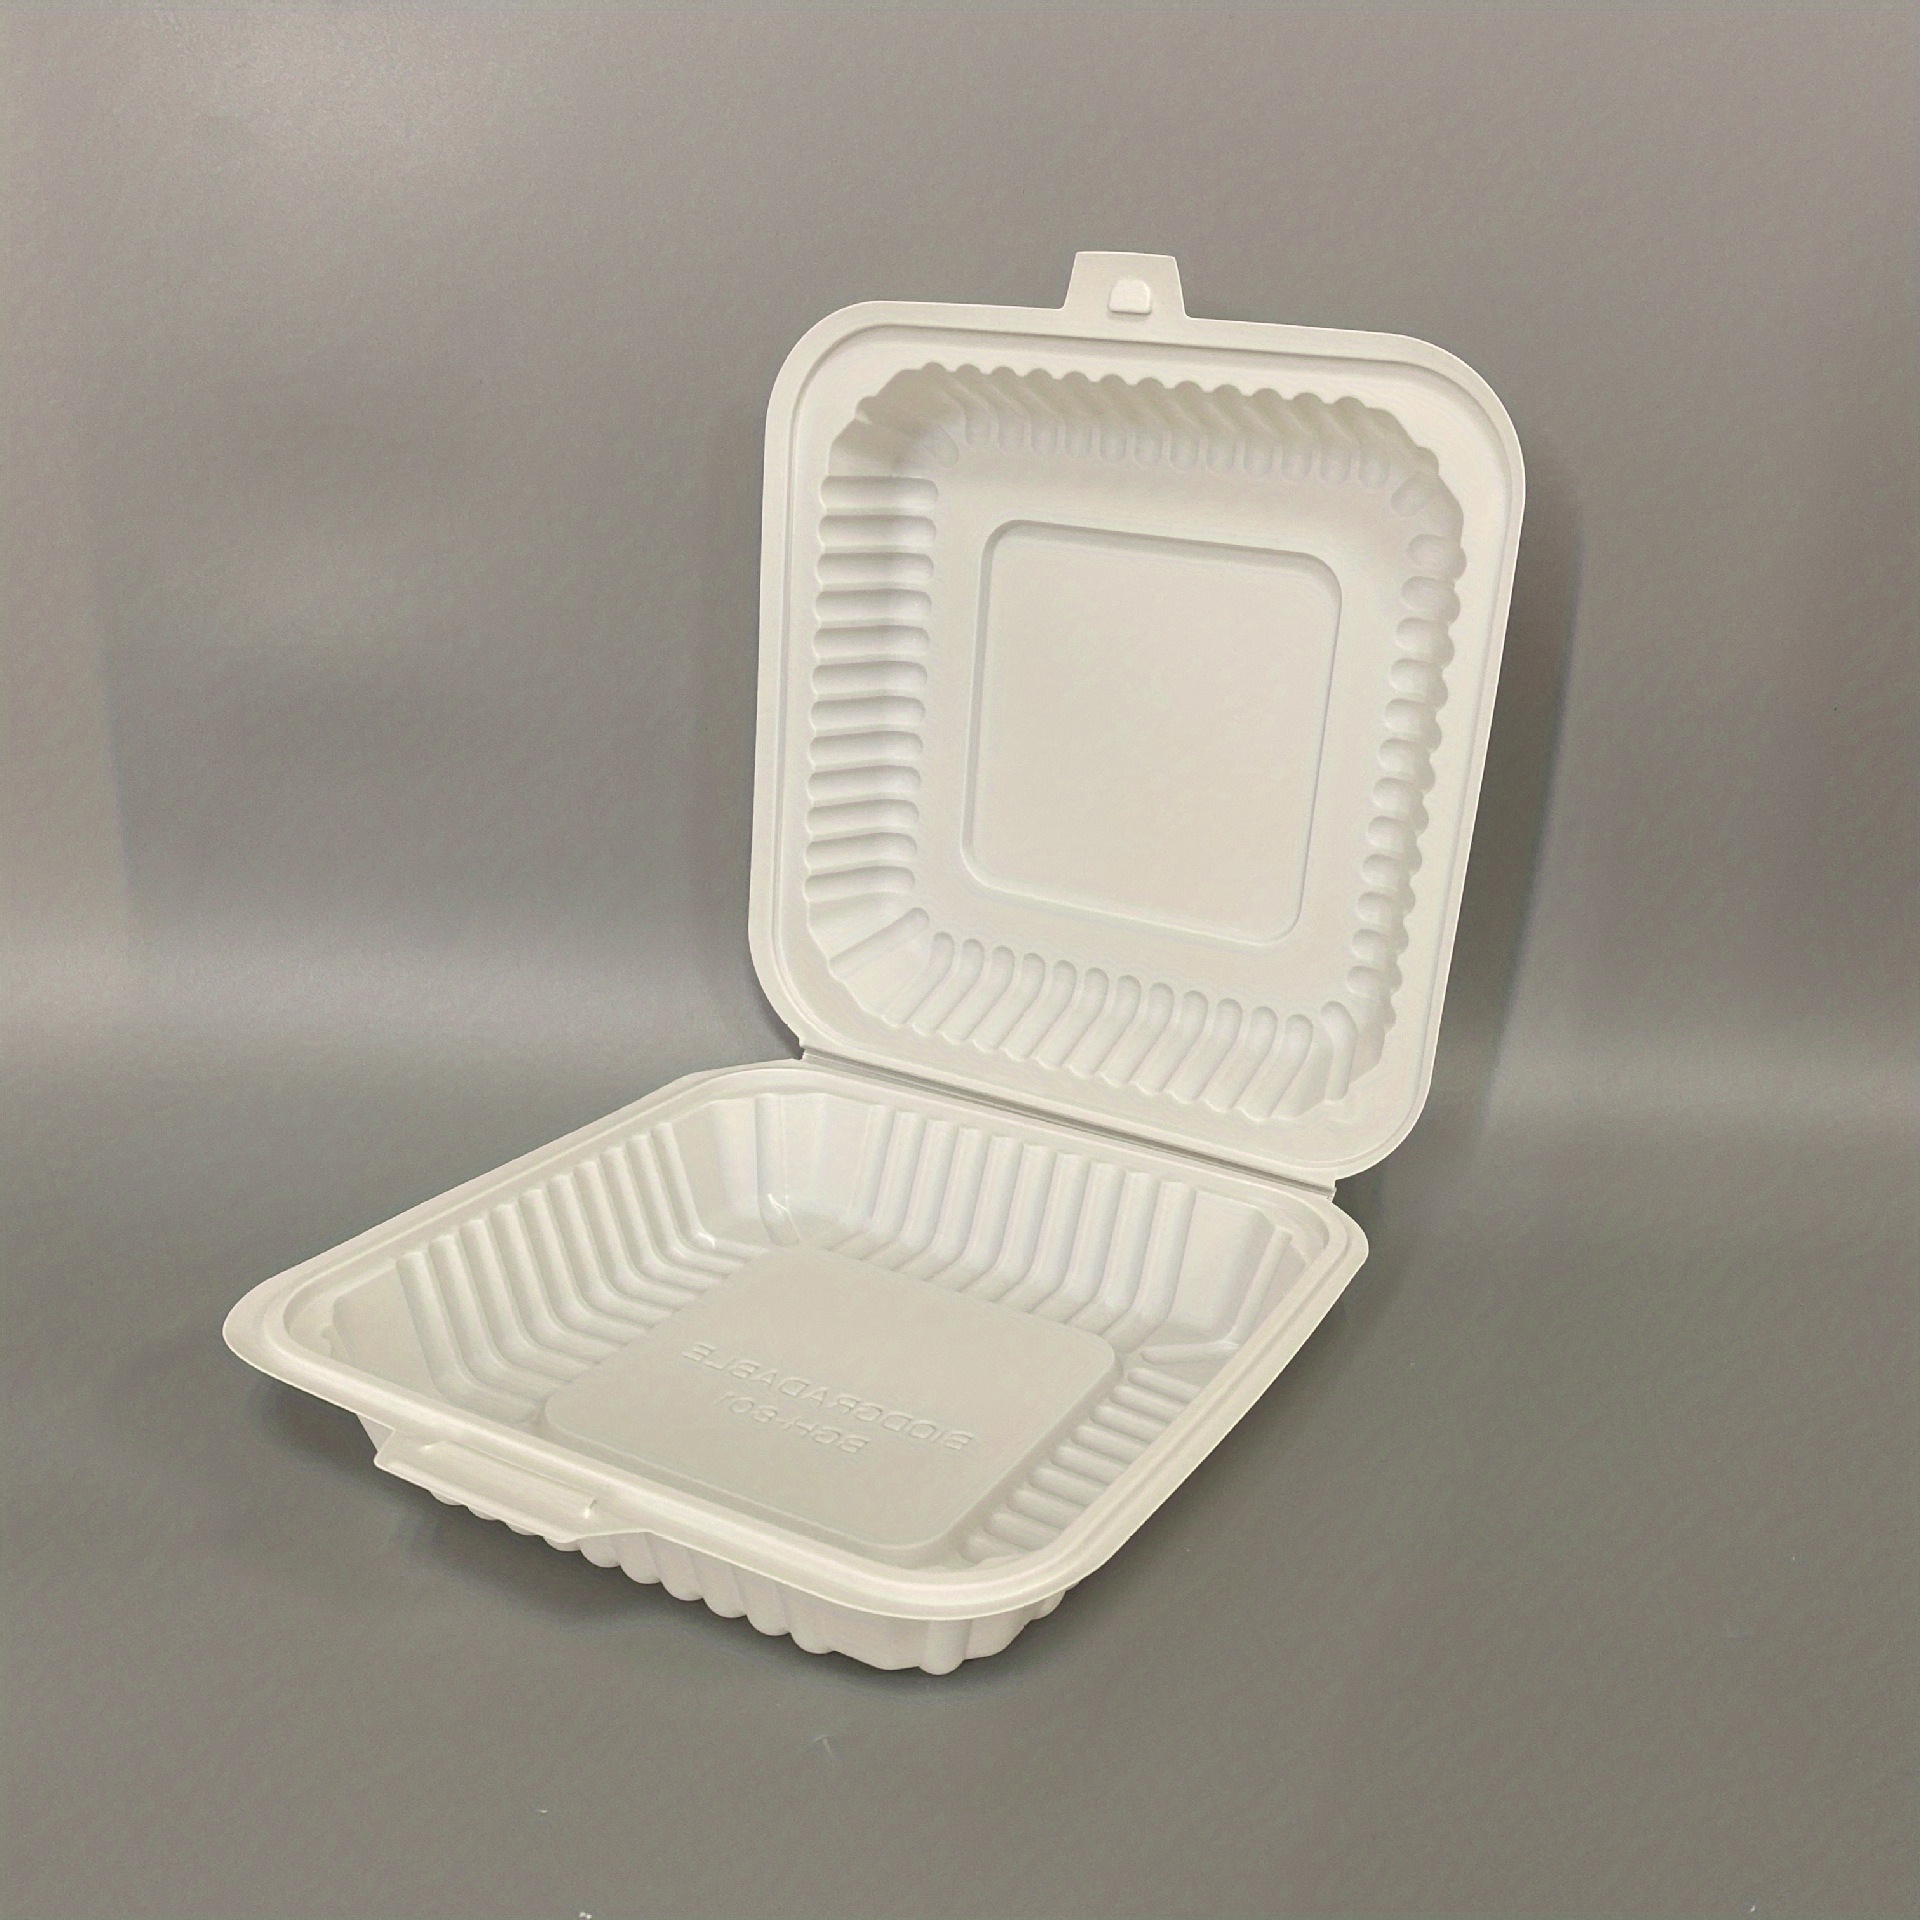 Biodegradable Clamshell Containers, Food Service Supplies